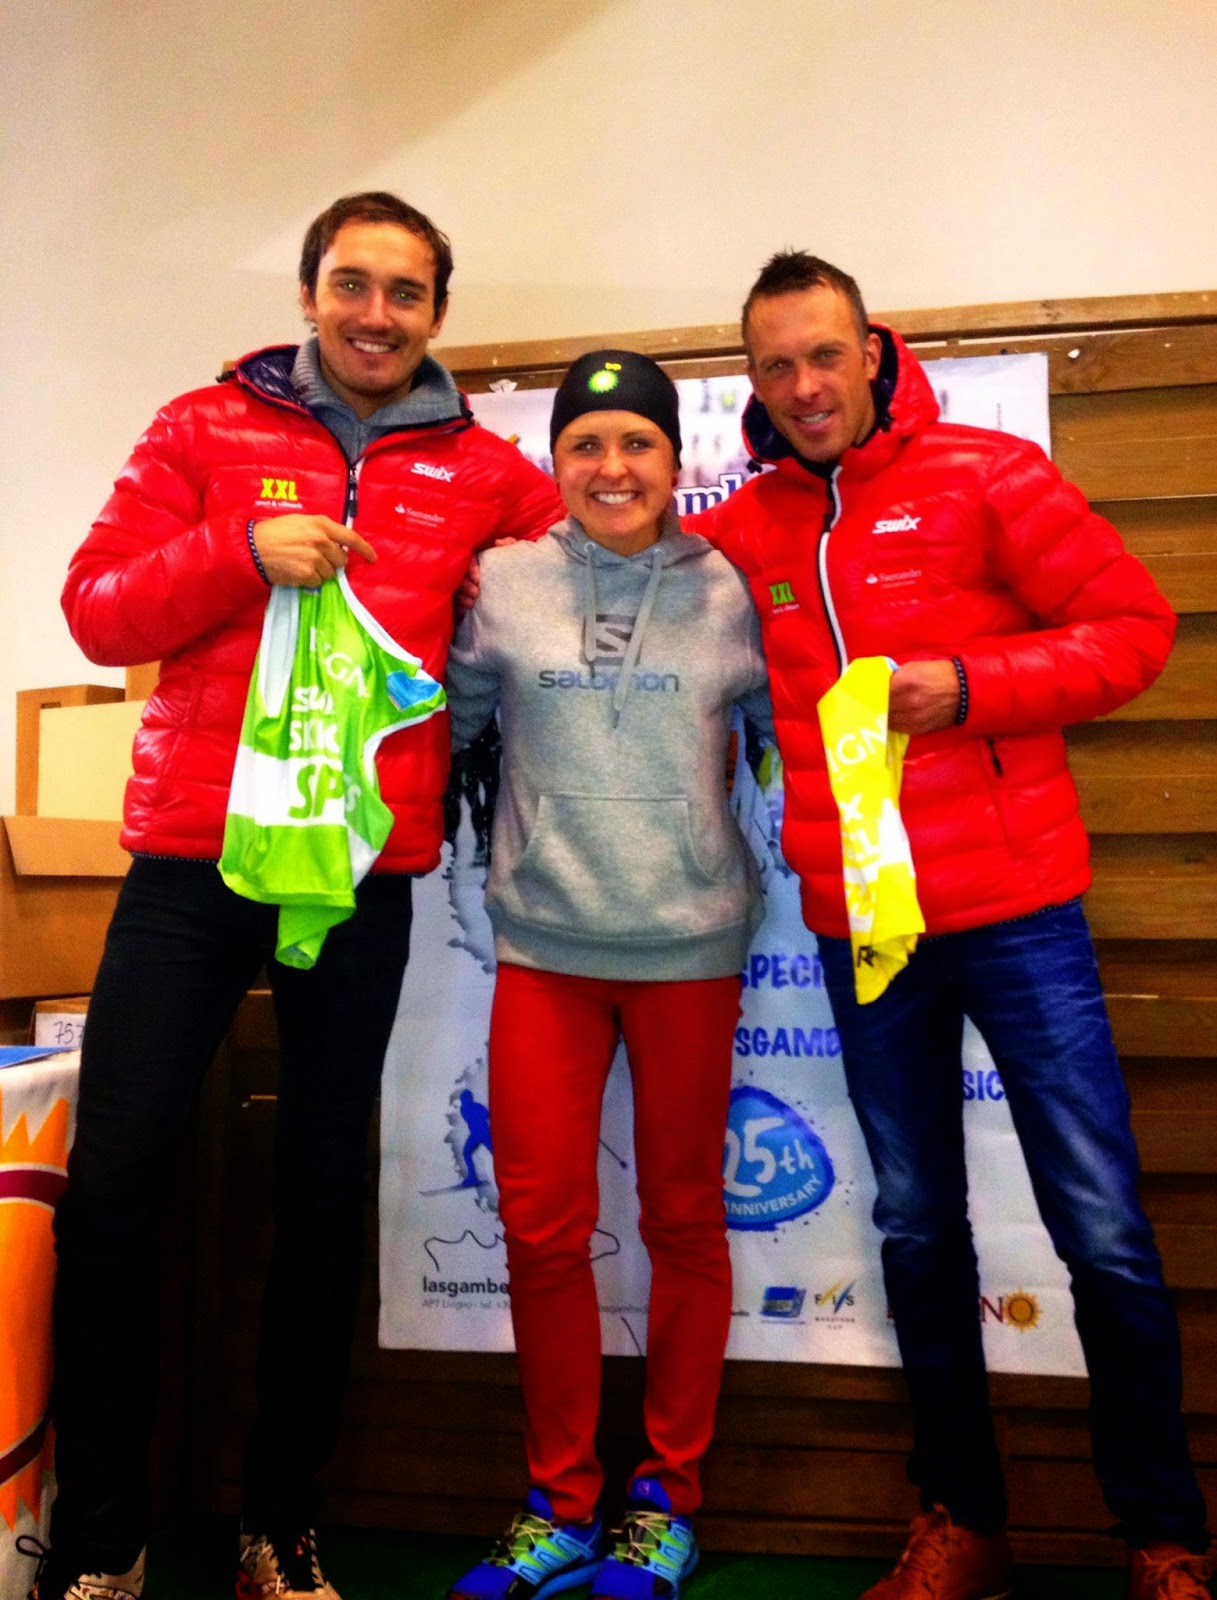 Holly Brooks (c) with Santander teammates Andreas Nygård (l) and Anders Aukland (r) who are the current sprint and overall leaders of the Swix Ski Classics. (Photo: Holly Brooks)